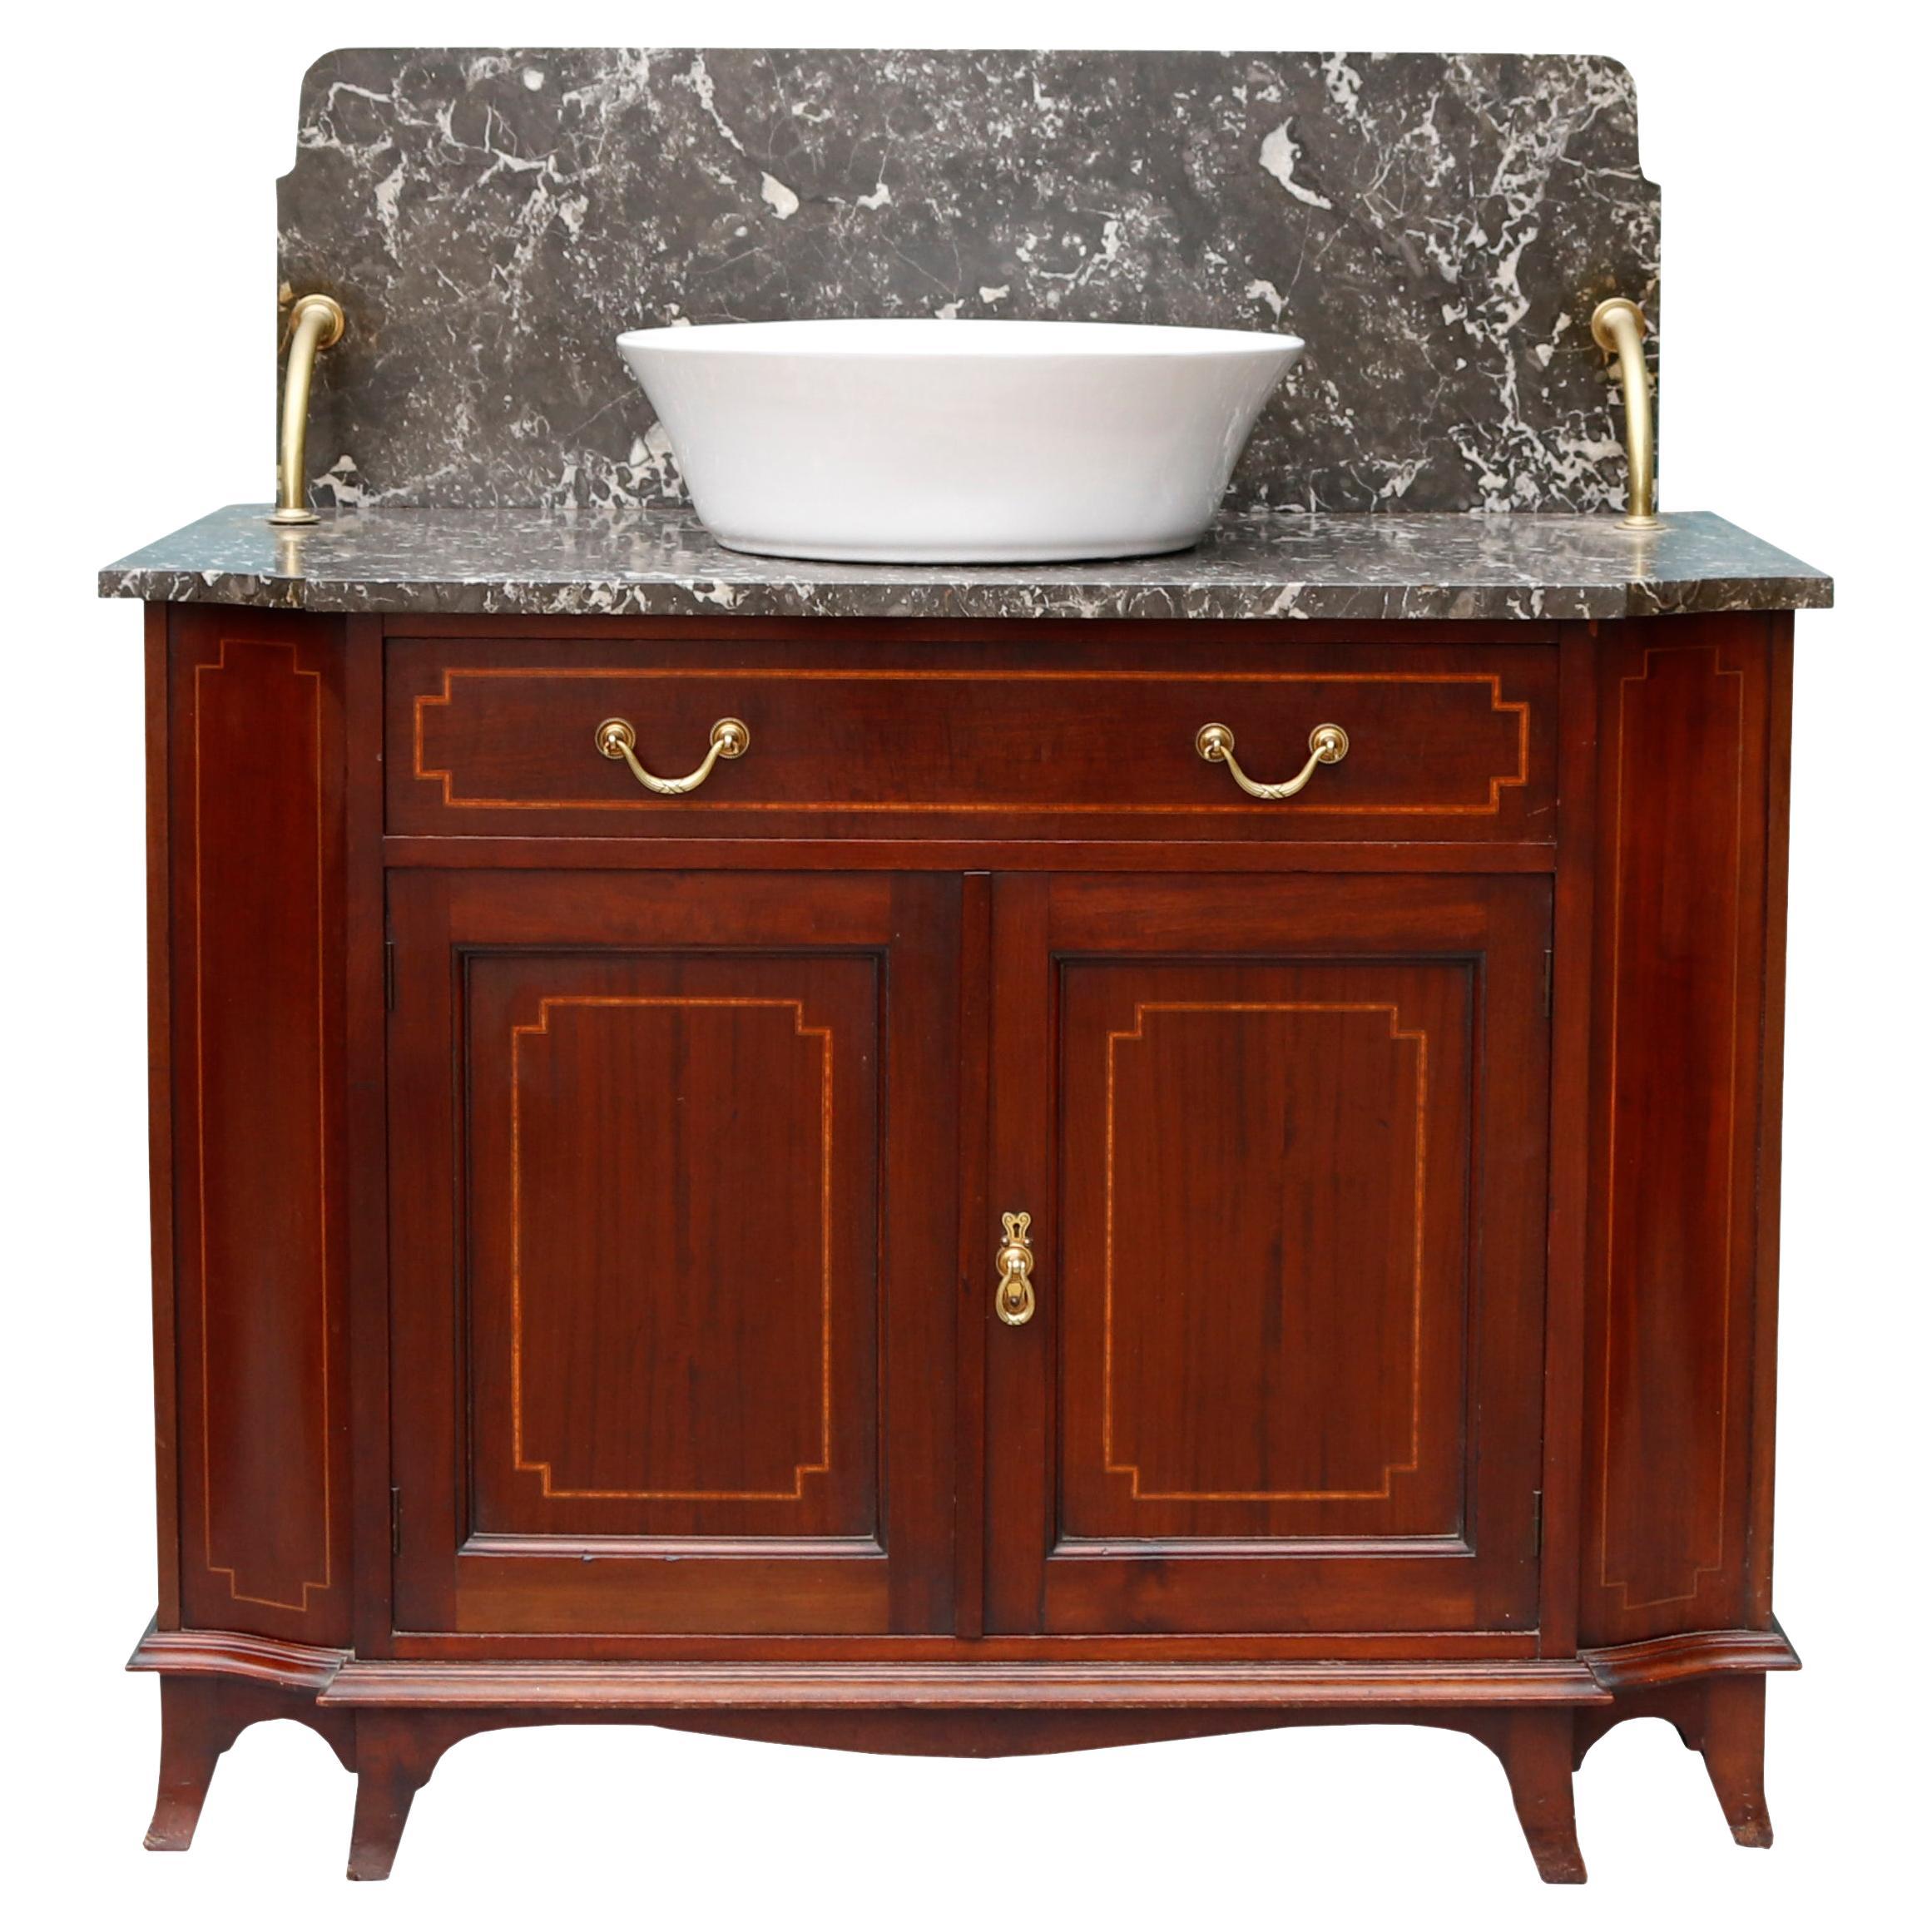 Edwardian Reclaimed Washstand For Sale